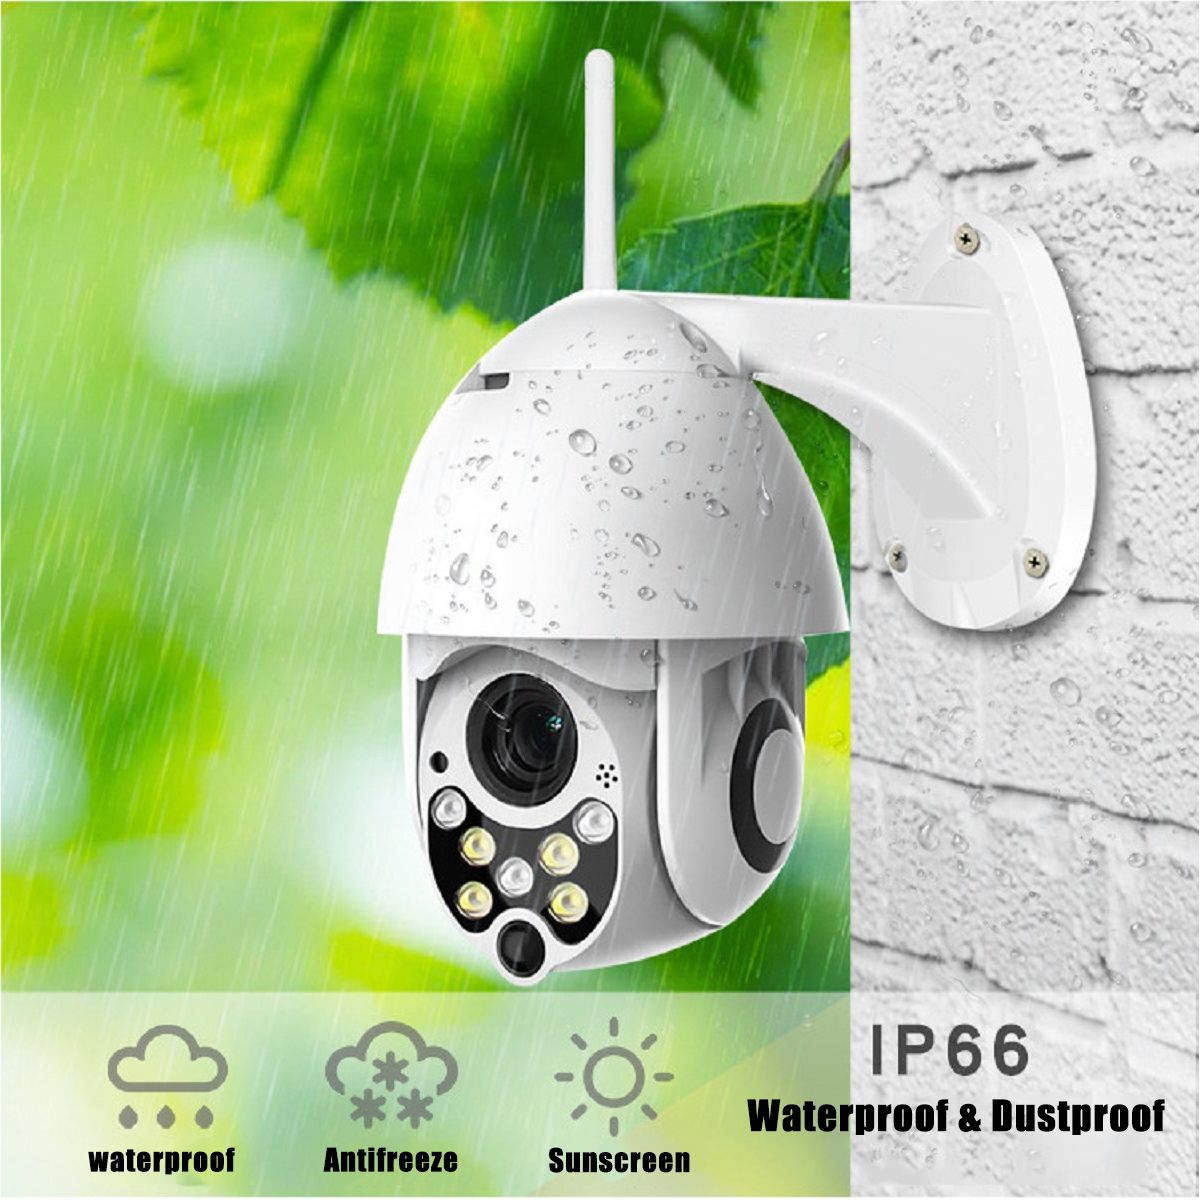 4X-ZOOM-1080P-FHD-360deg-PTZ-WIFI-IP-Camera-Infrared-Night-Vision-Motion-Detecting-Two-Way-Voice-1496890